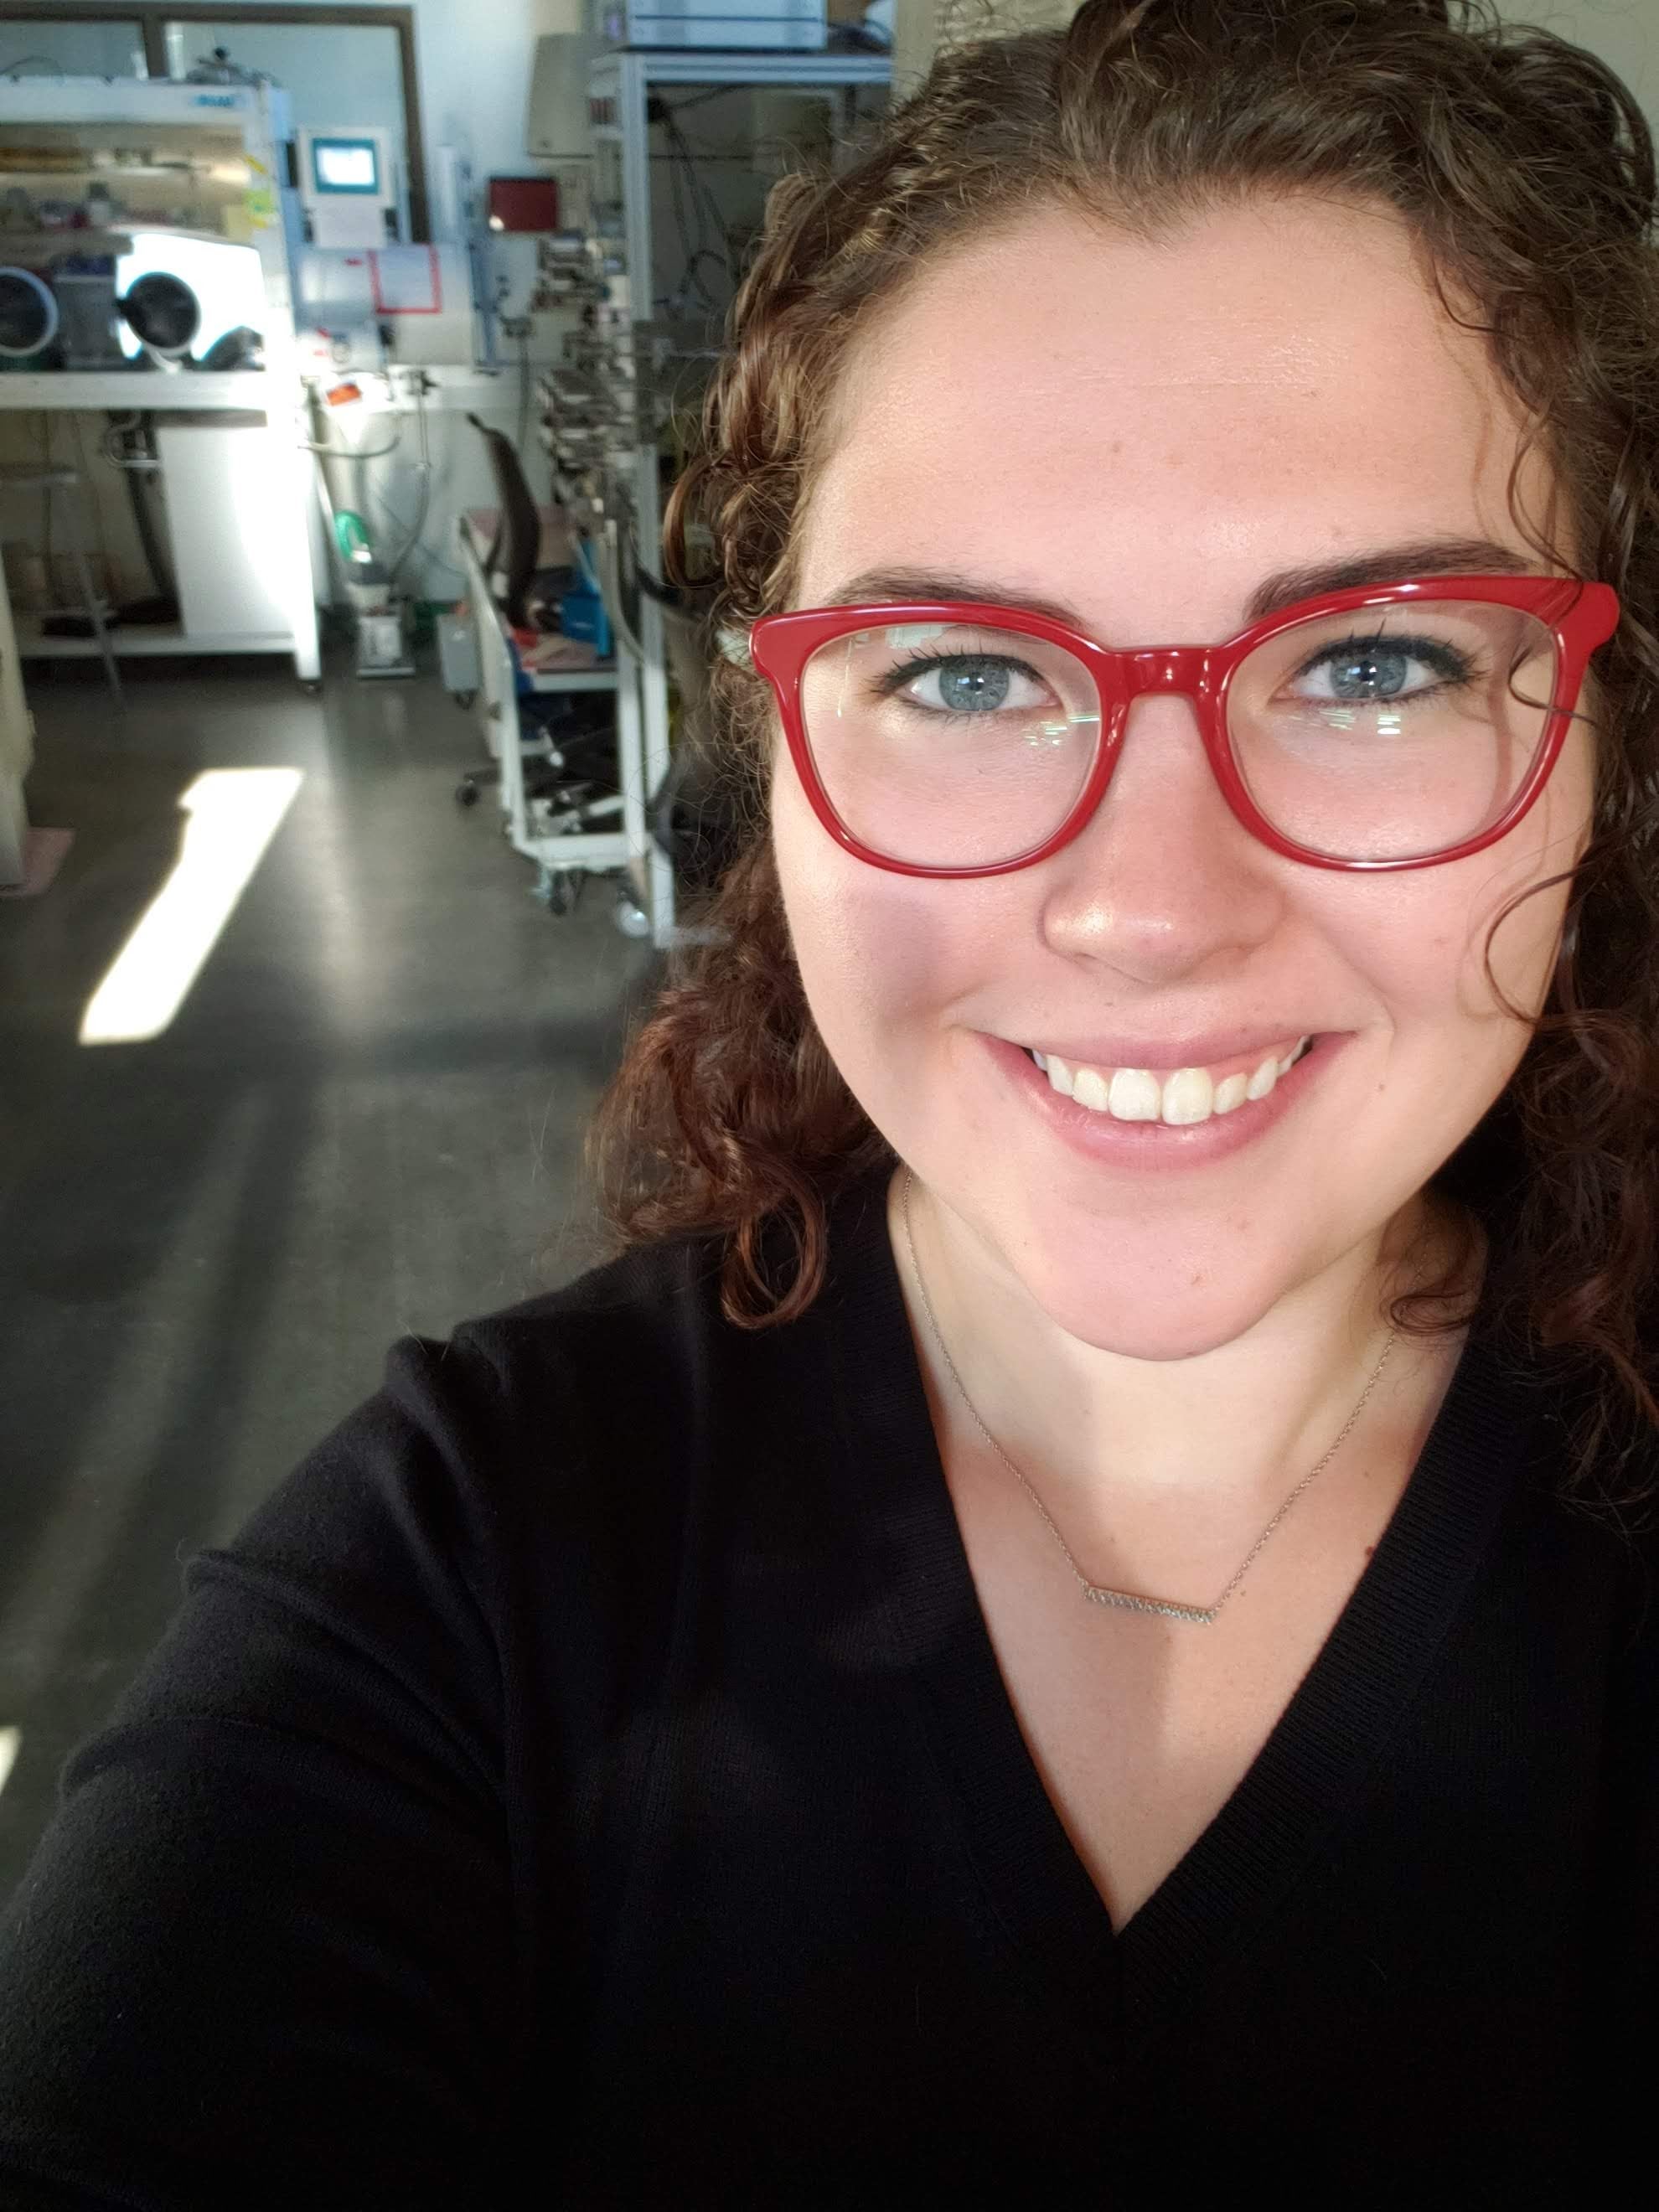 Selfie of Erin Taylor, wearing red framed eyeglasses, with lab equipment in the background